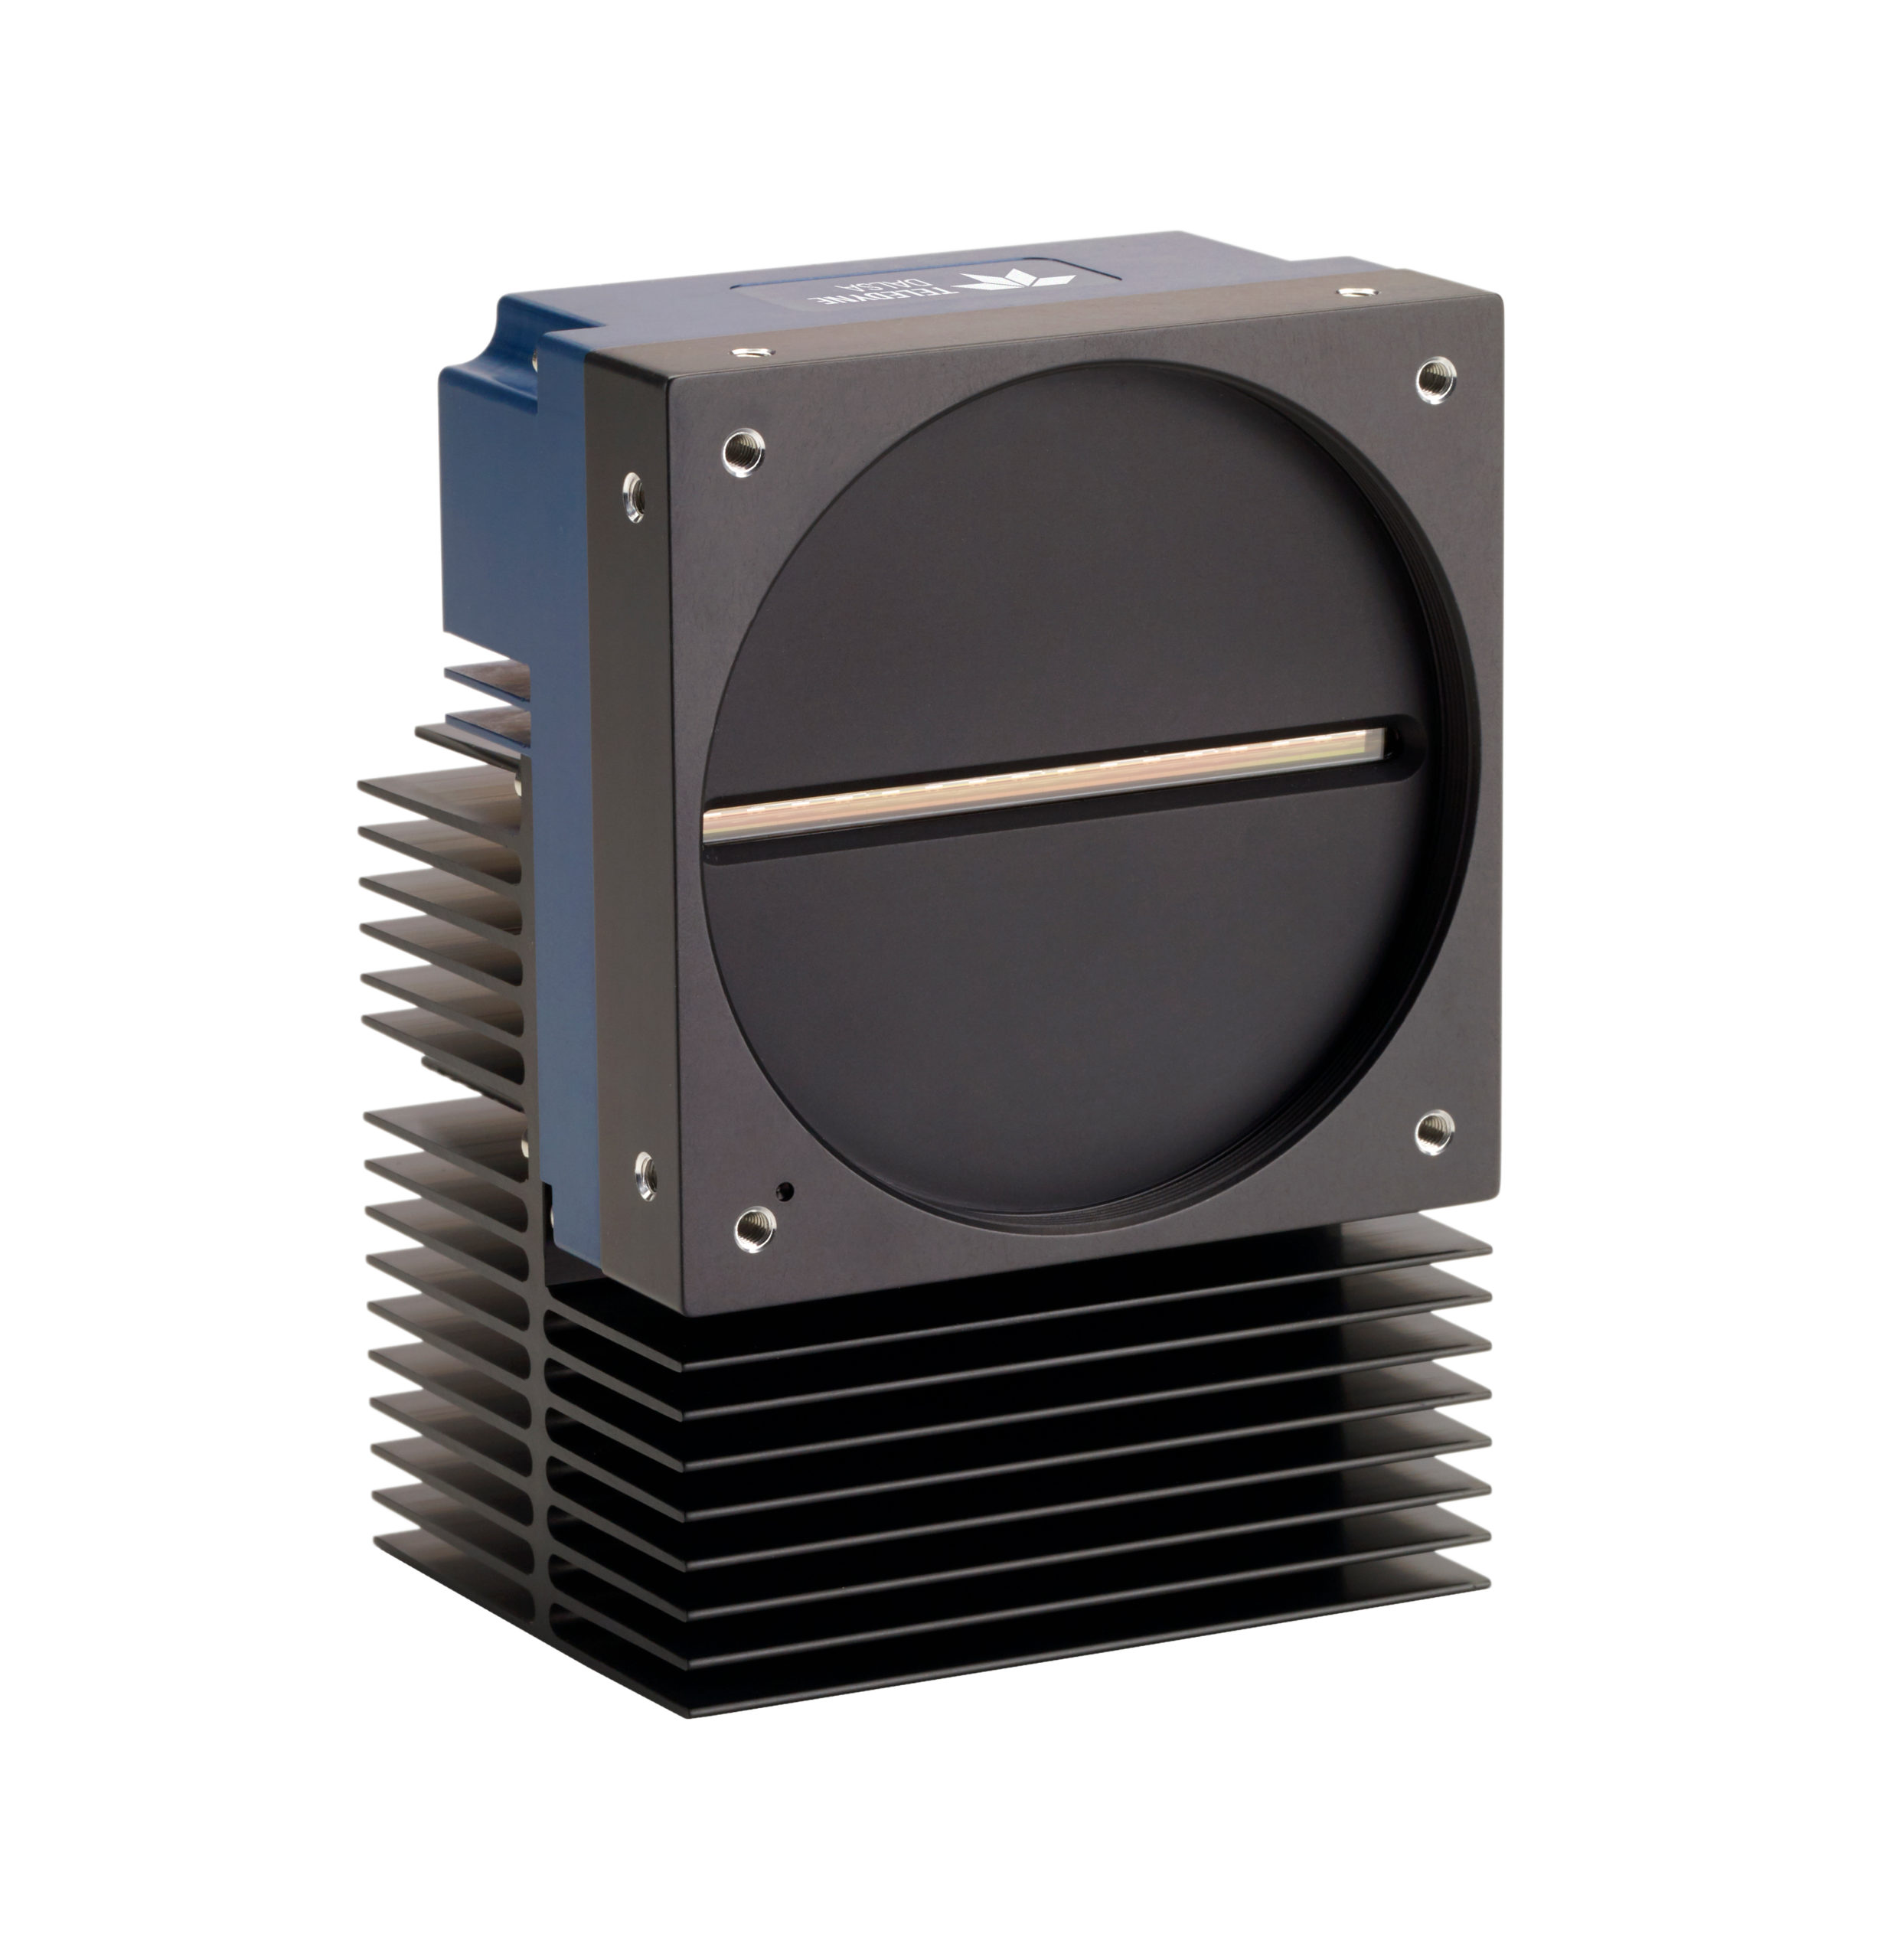 Teledyne’s Backside Olluminated TDI Camera Delivers Greater Sensitivity for Near Ultraviolet and Visible Imaging